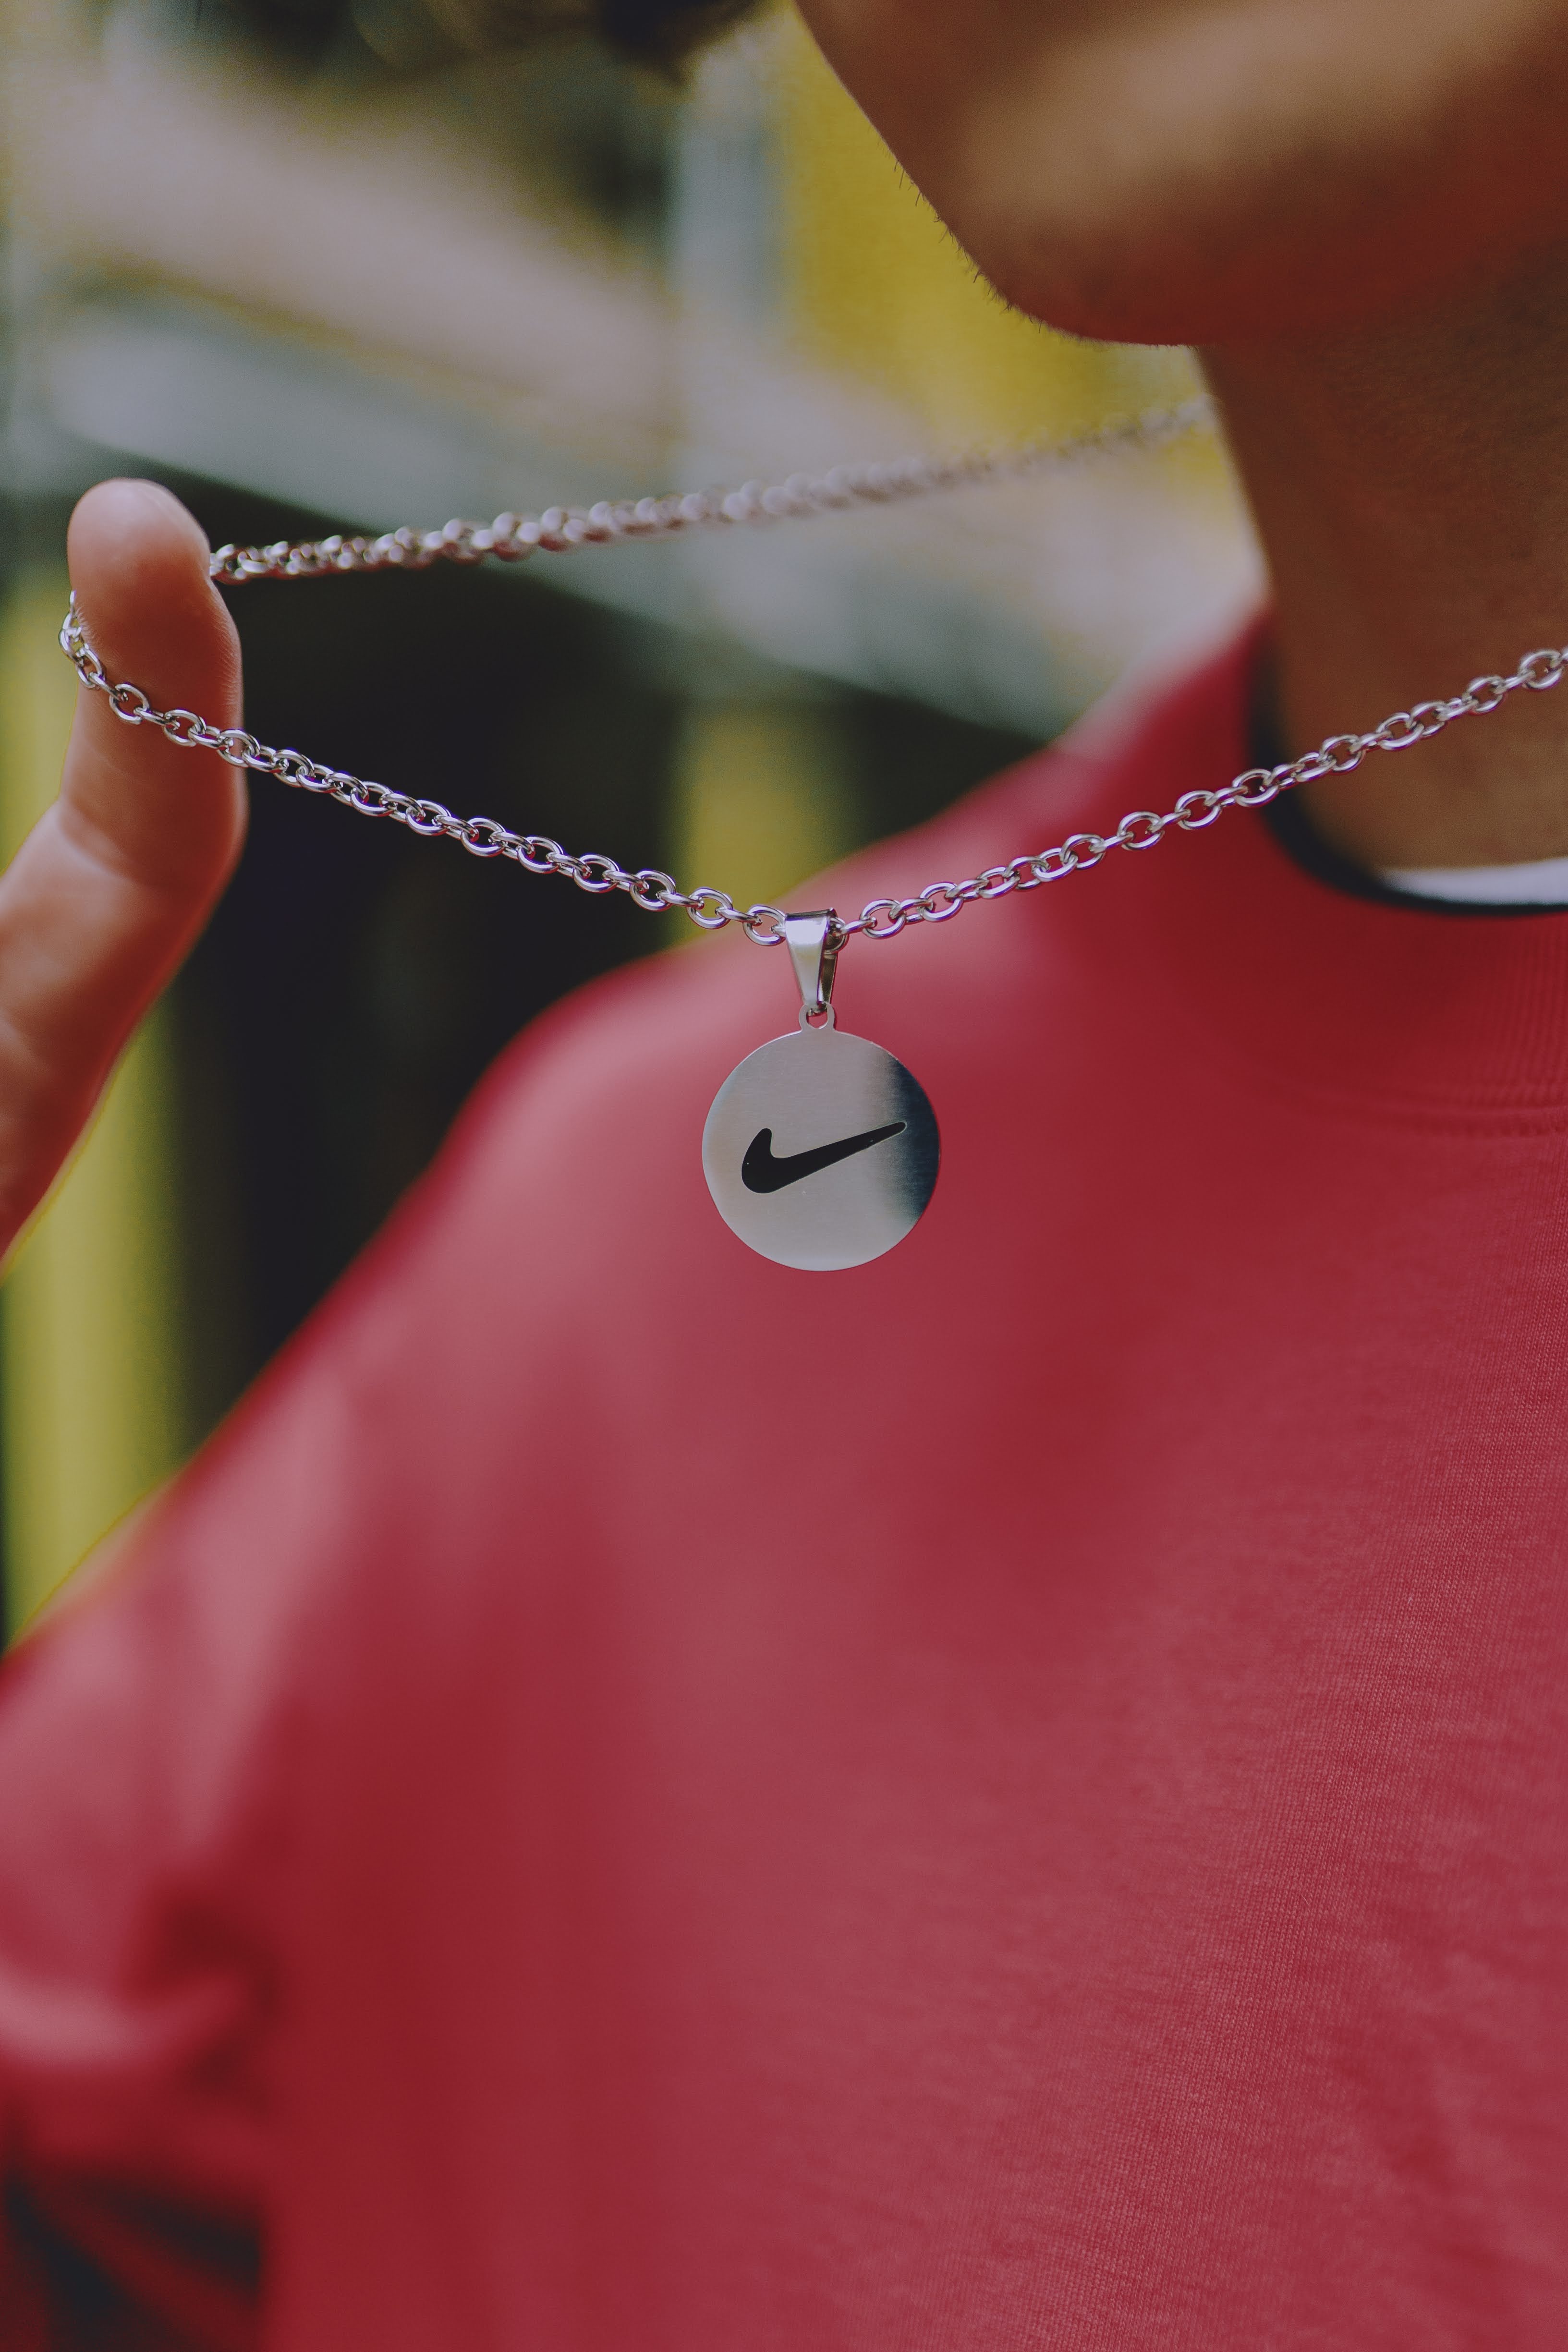 Jugar con Teseo ANTES DE CRISTO. Stainless Steel Nike Pendant Necklace - Bless Up Vintage